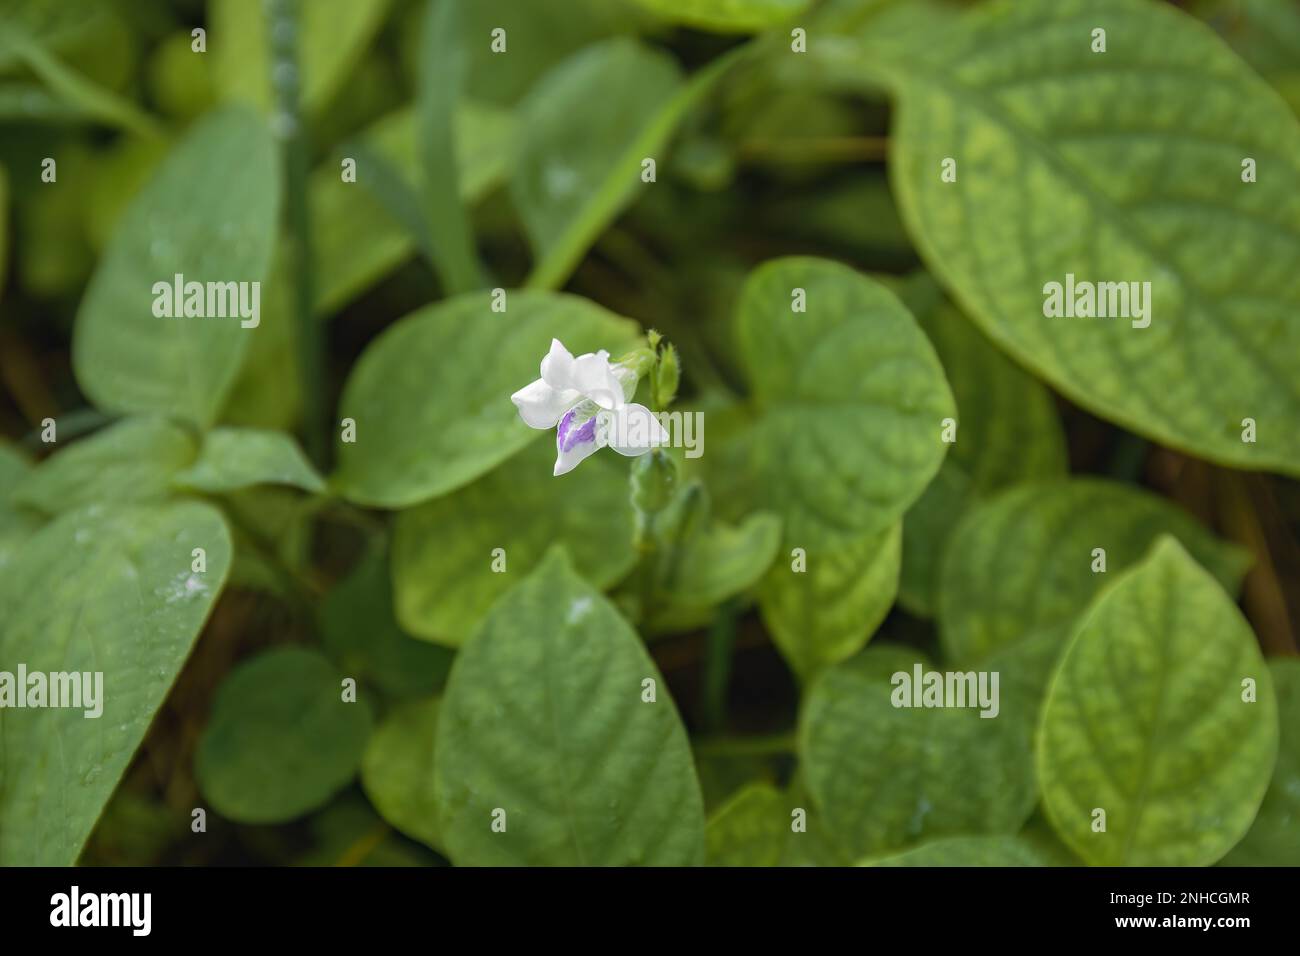 Asystasia gangetica micrantha, Chinese violet subspecies. Single flower with green leaves background Stock Photo